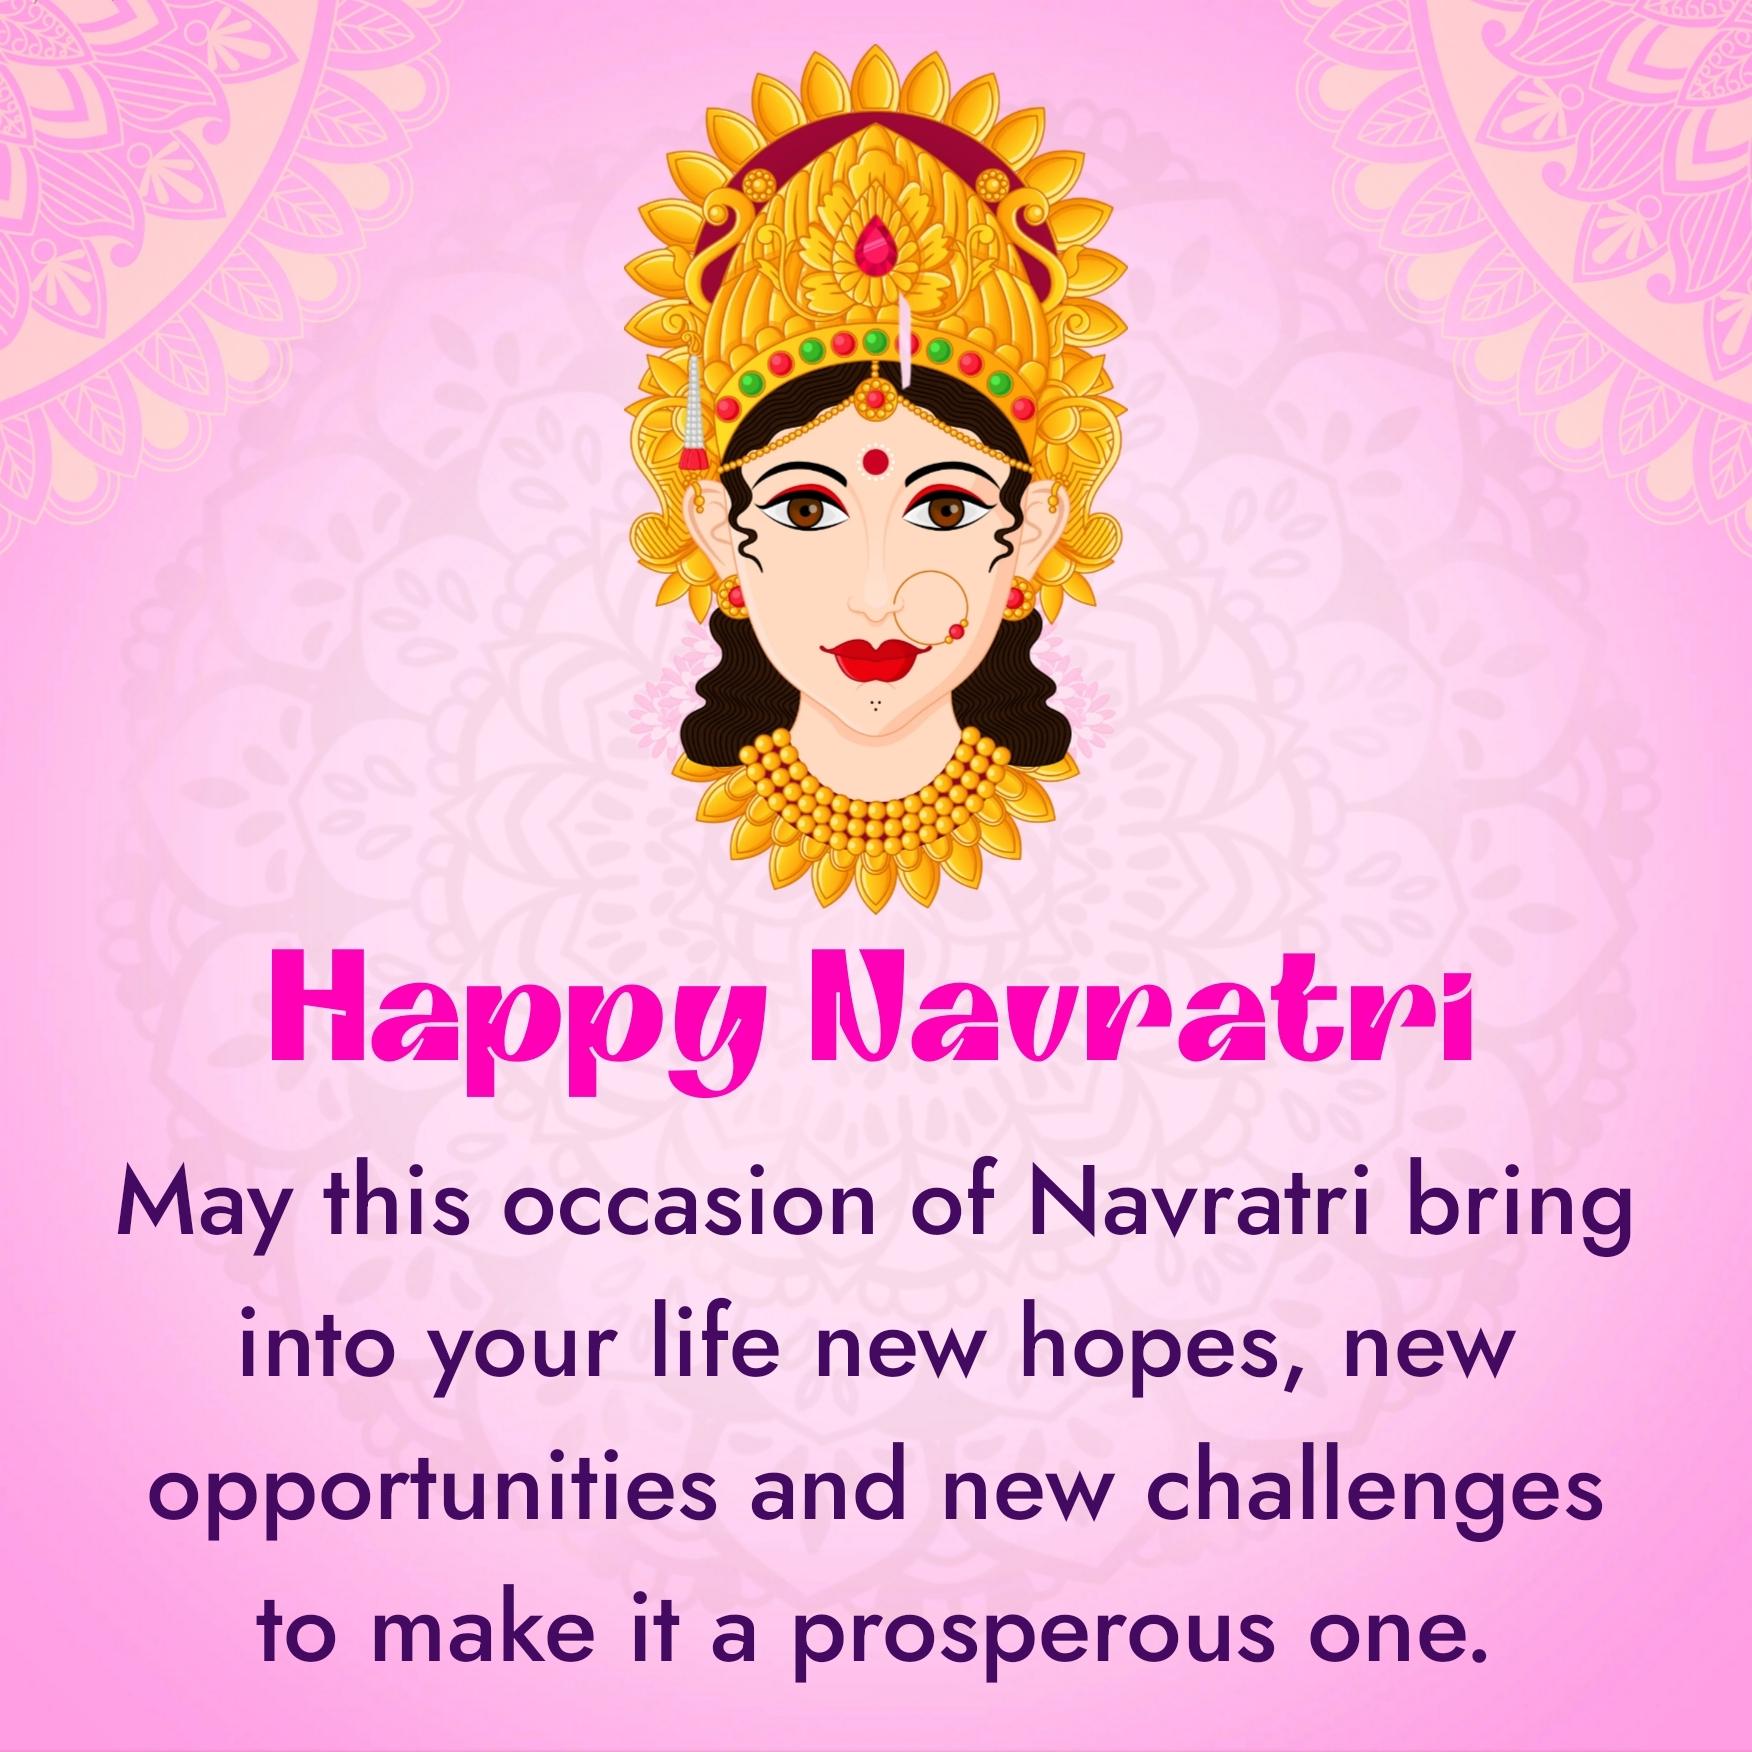 May this occasion of Navratri bring into your life new hopes